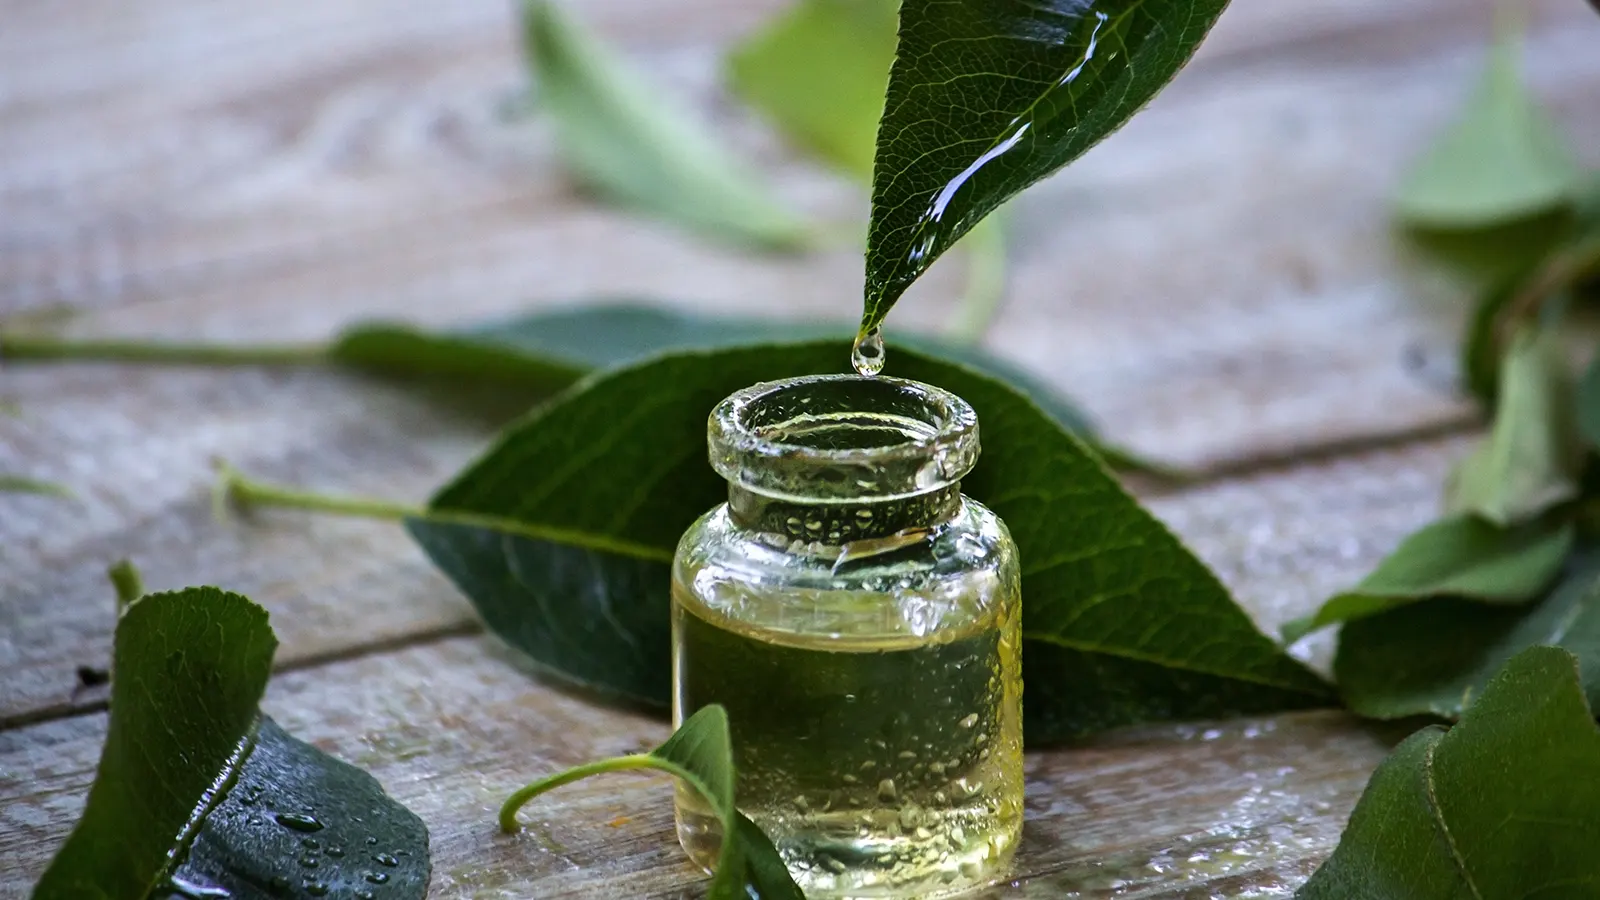 What Are the Benefits of Niaouli Oil?